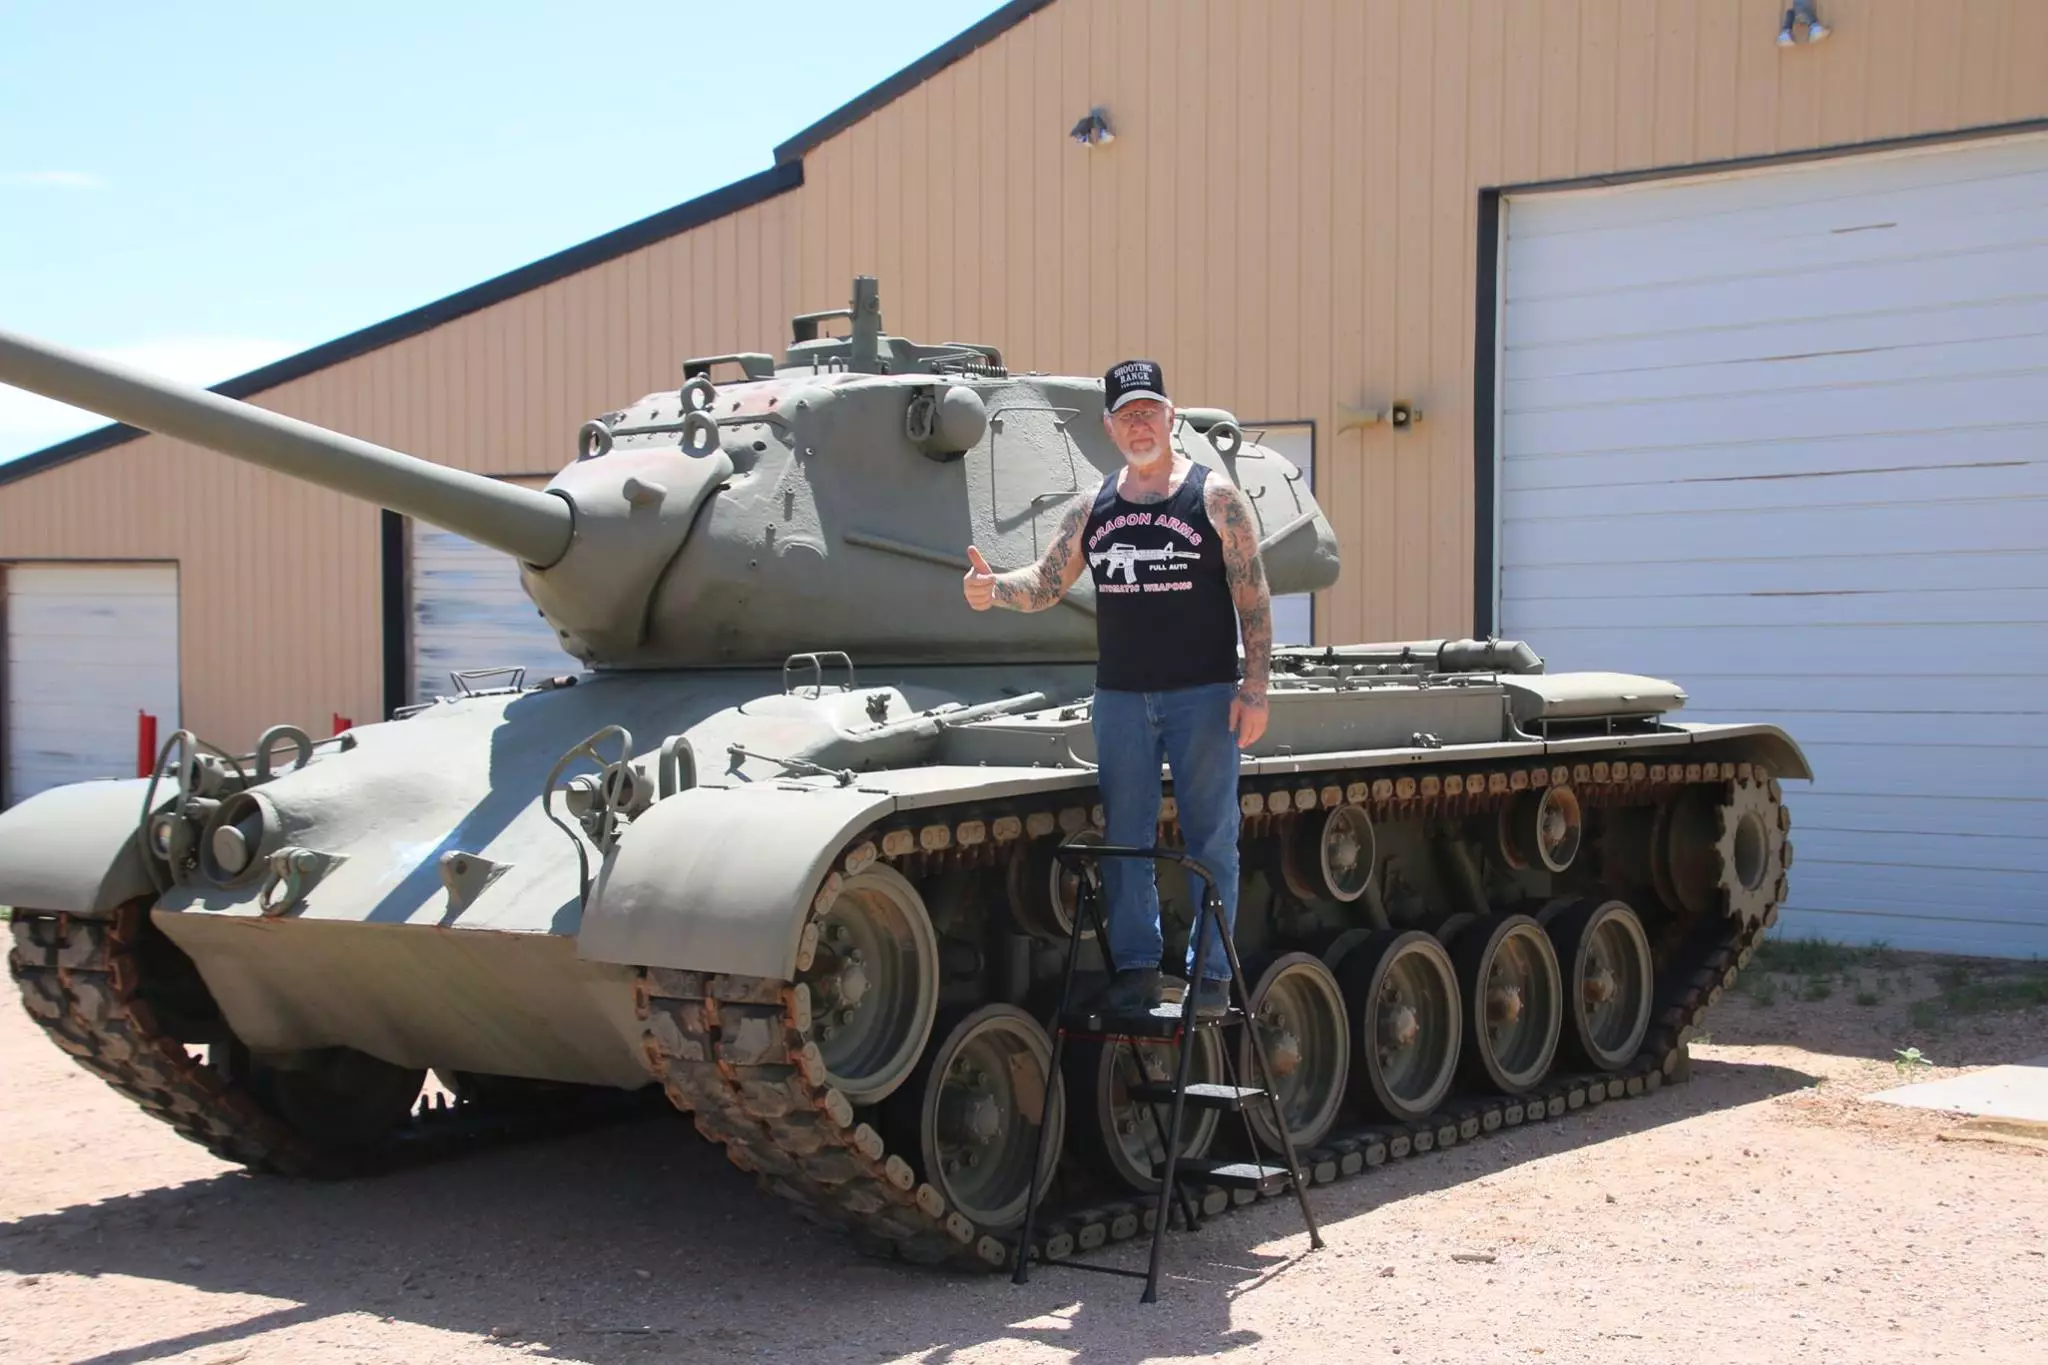 Mel standing next to his tank